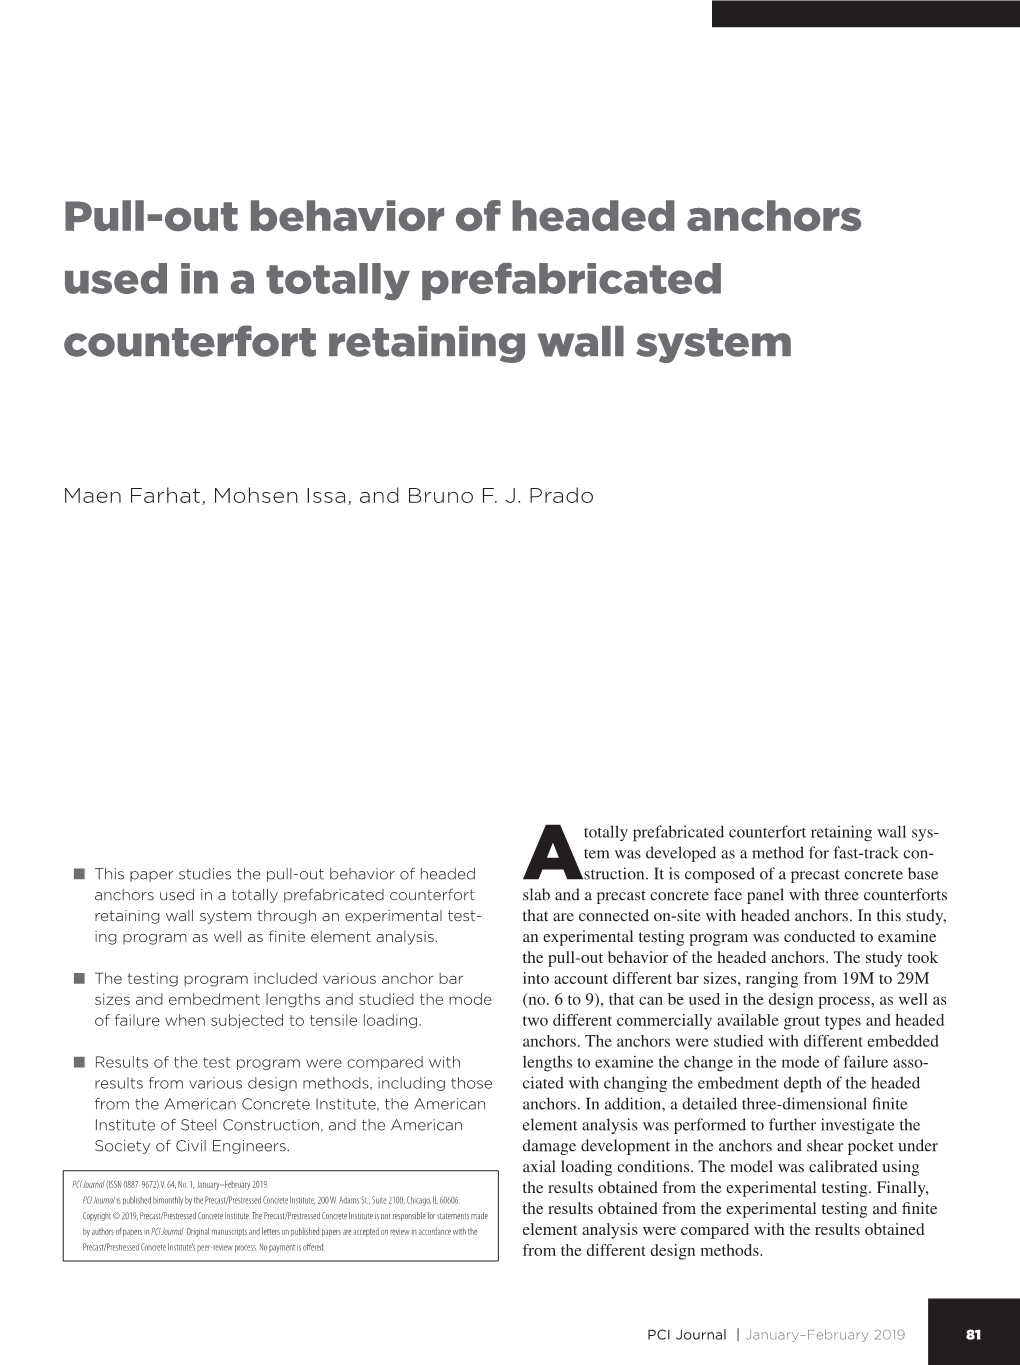 Pull-Out Behavior of Headed Anchors Used in a Totally Prefabricated Counterfort Retaining Wall System